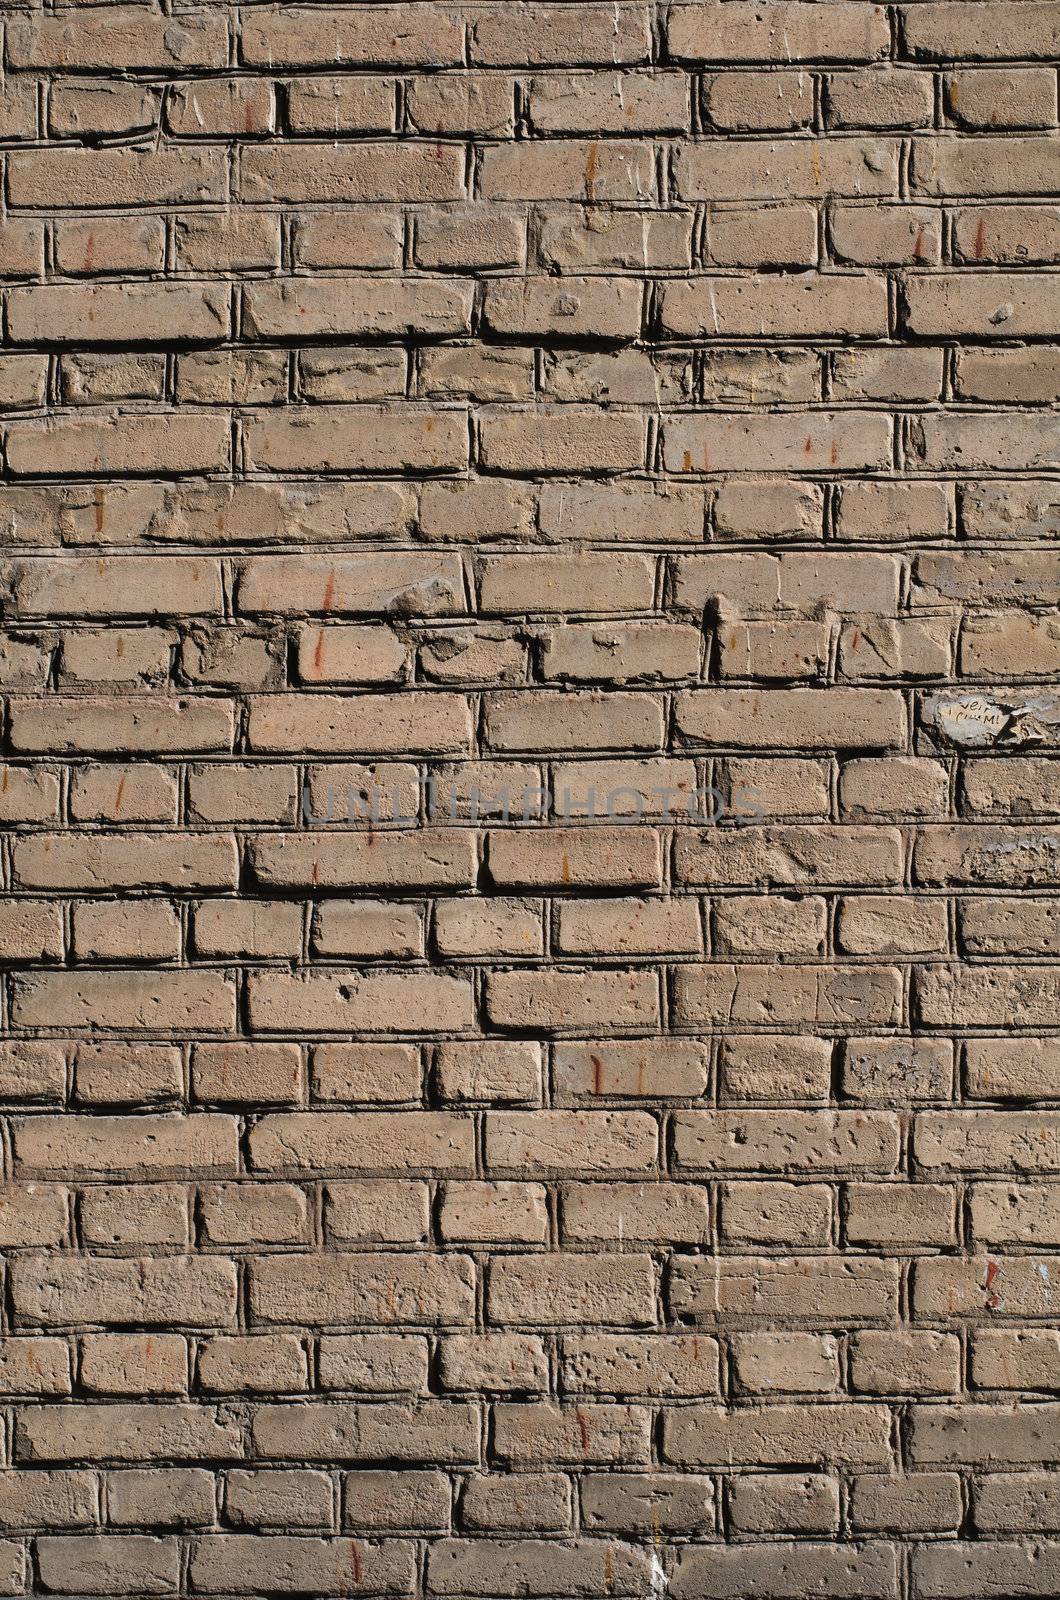 Aged brick wall background. High resolution texture